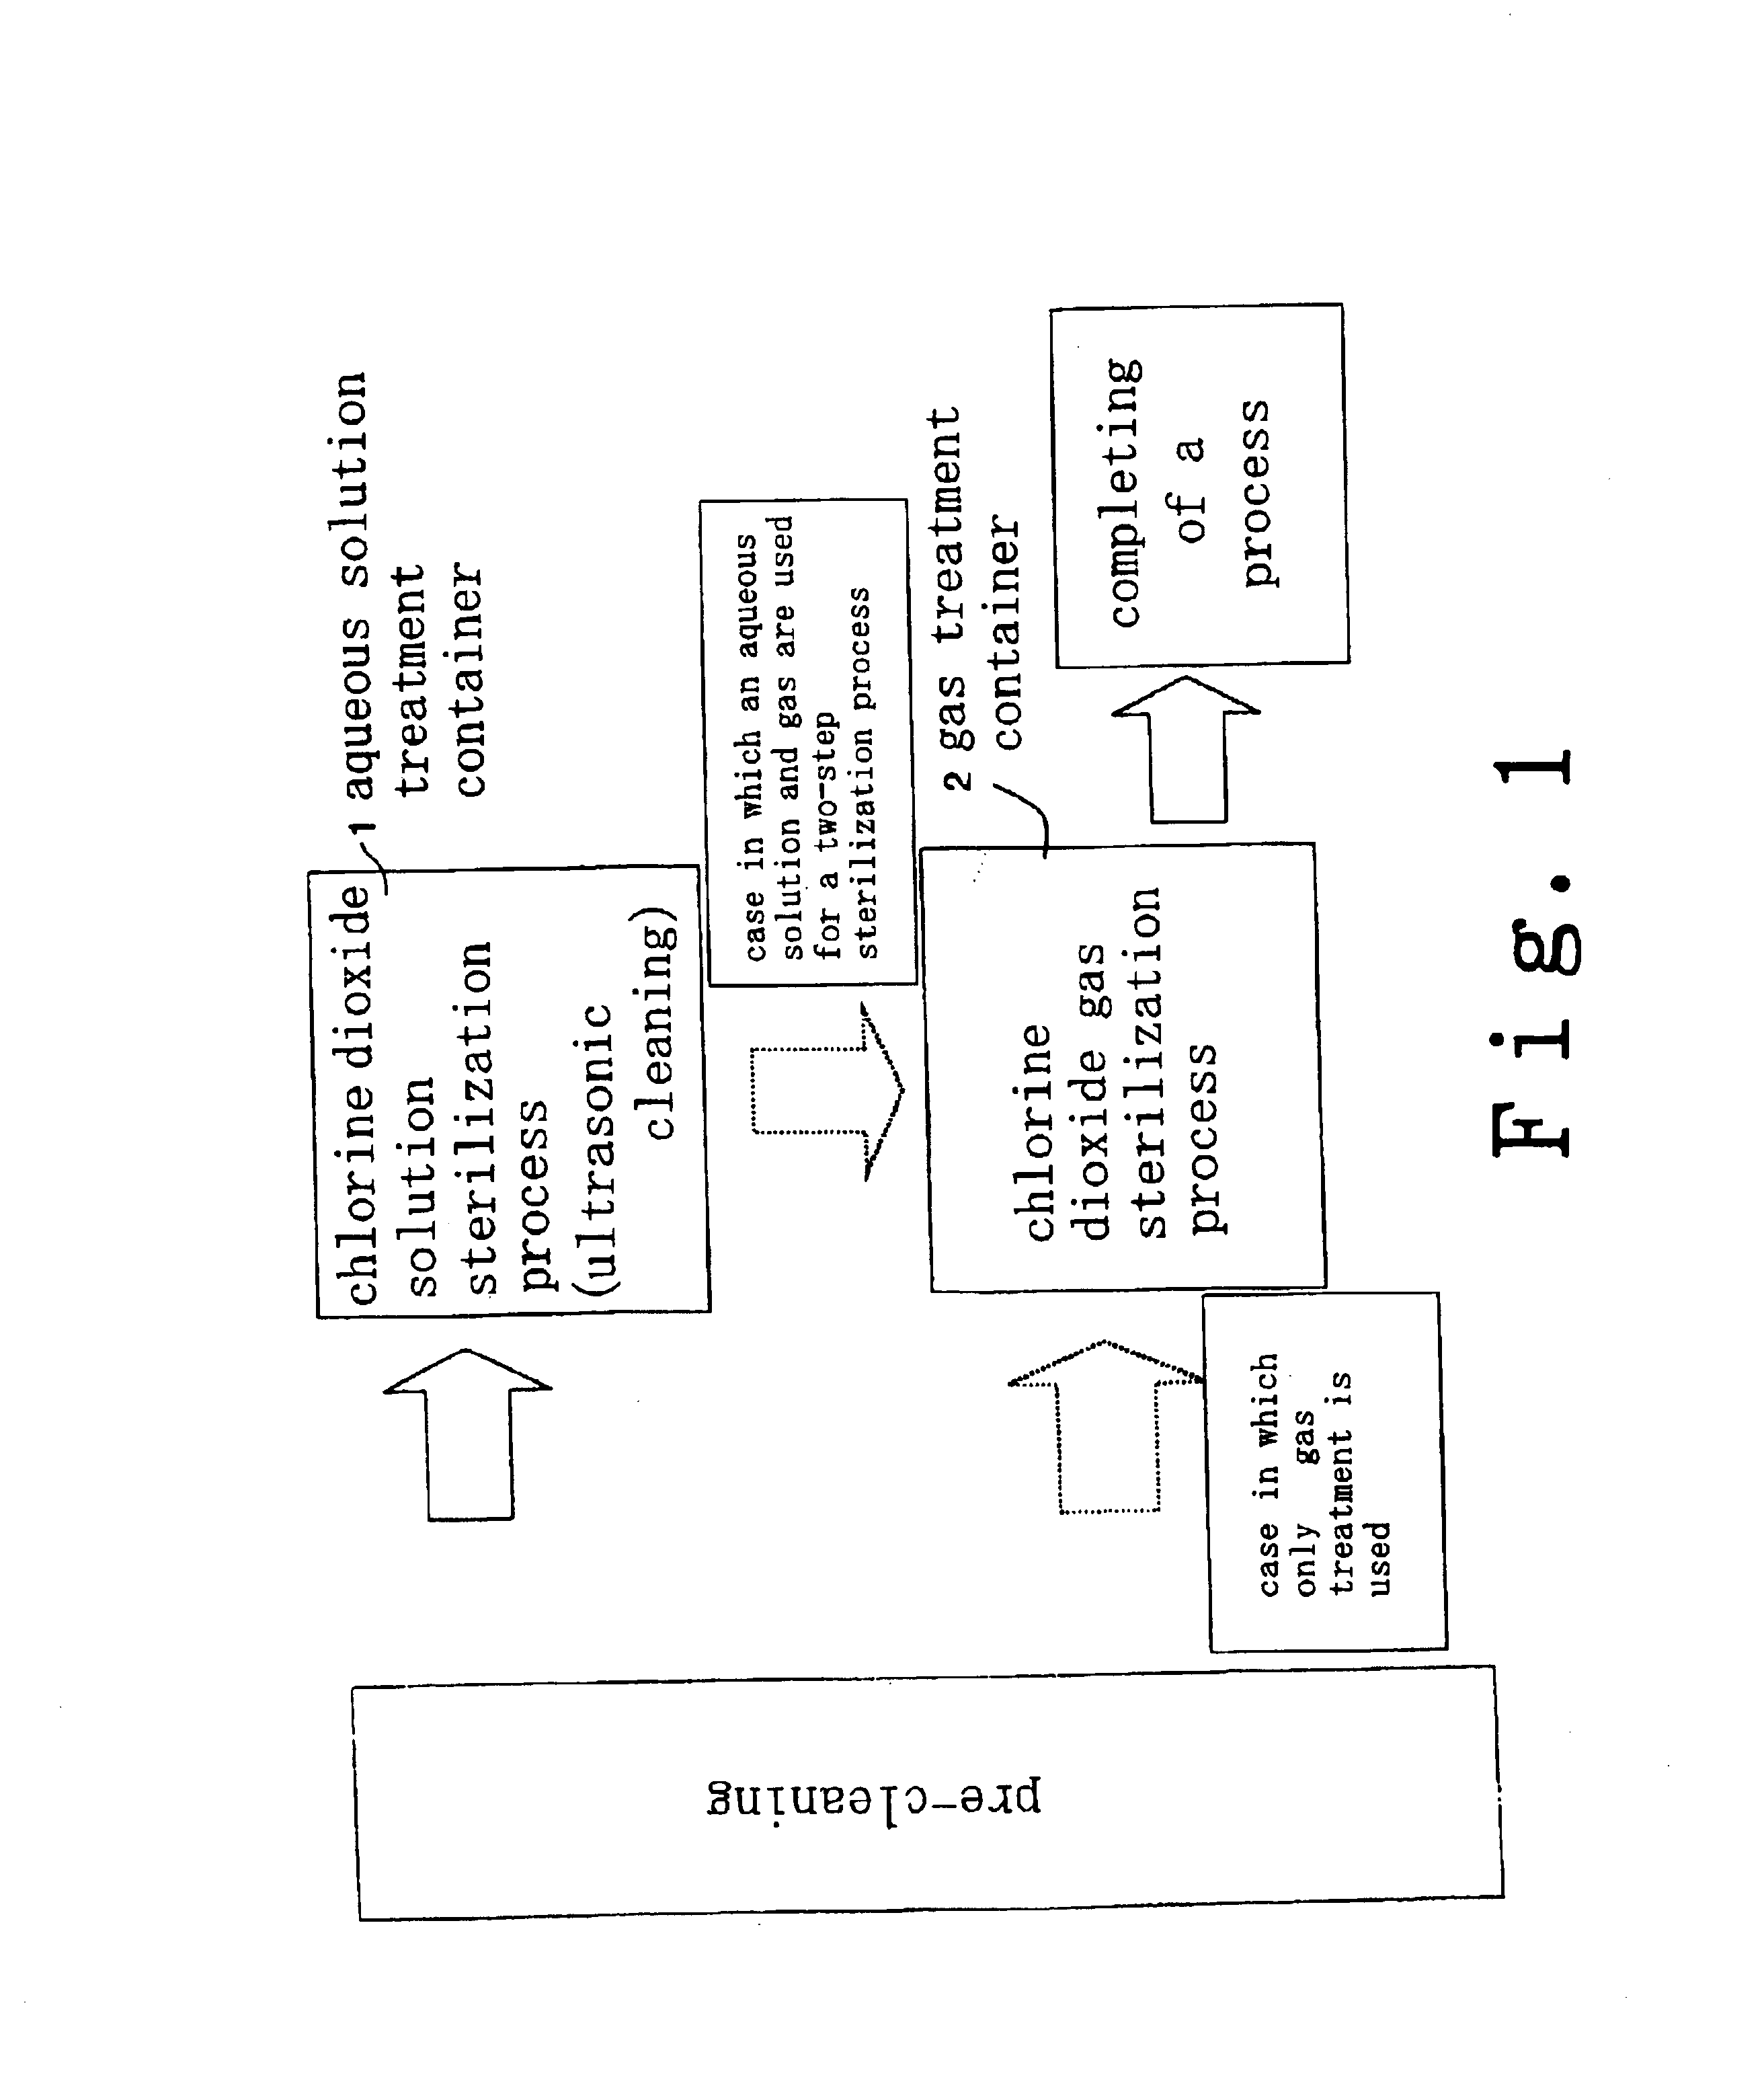 Method for cleaning and sterilizing medical equipment after use